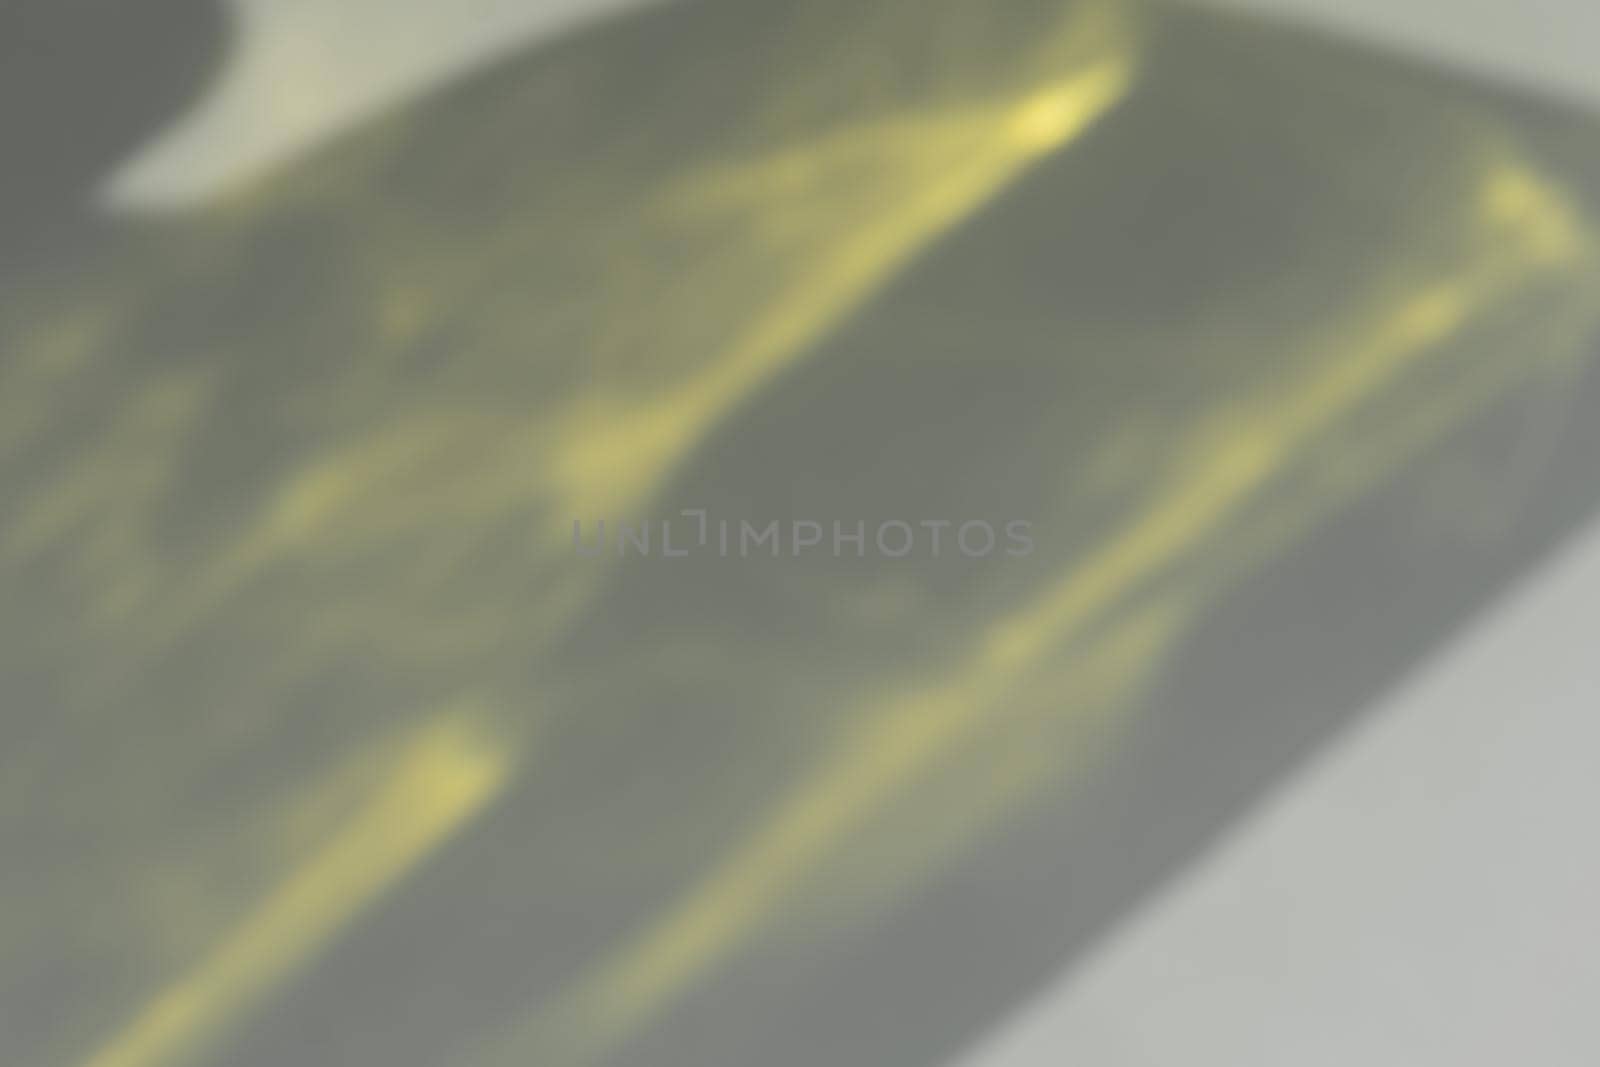 Caustic effect light refraction on yellow wall overlay, blurred sun rays refracting through glass prism with shadow. by photolime